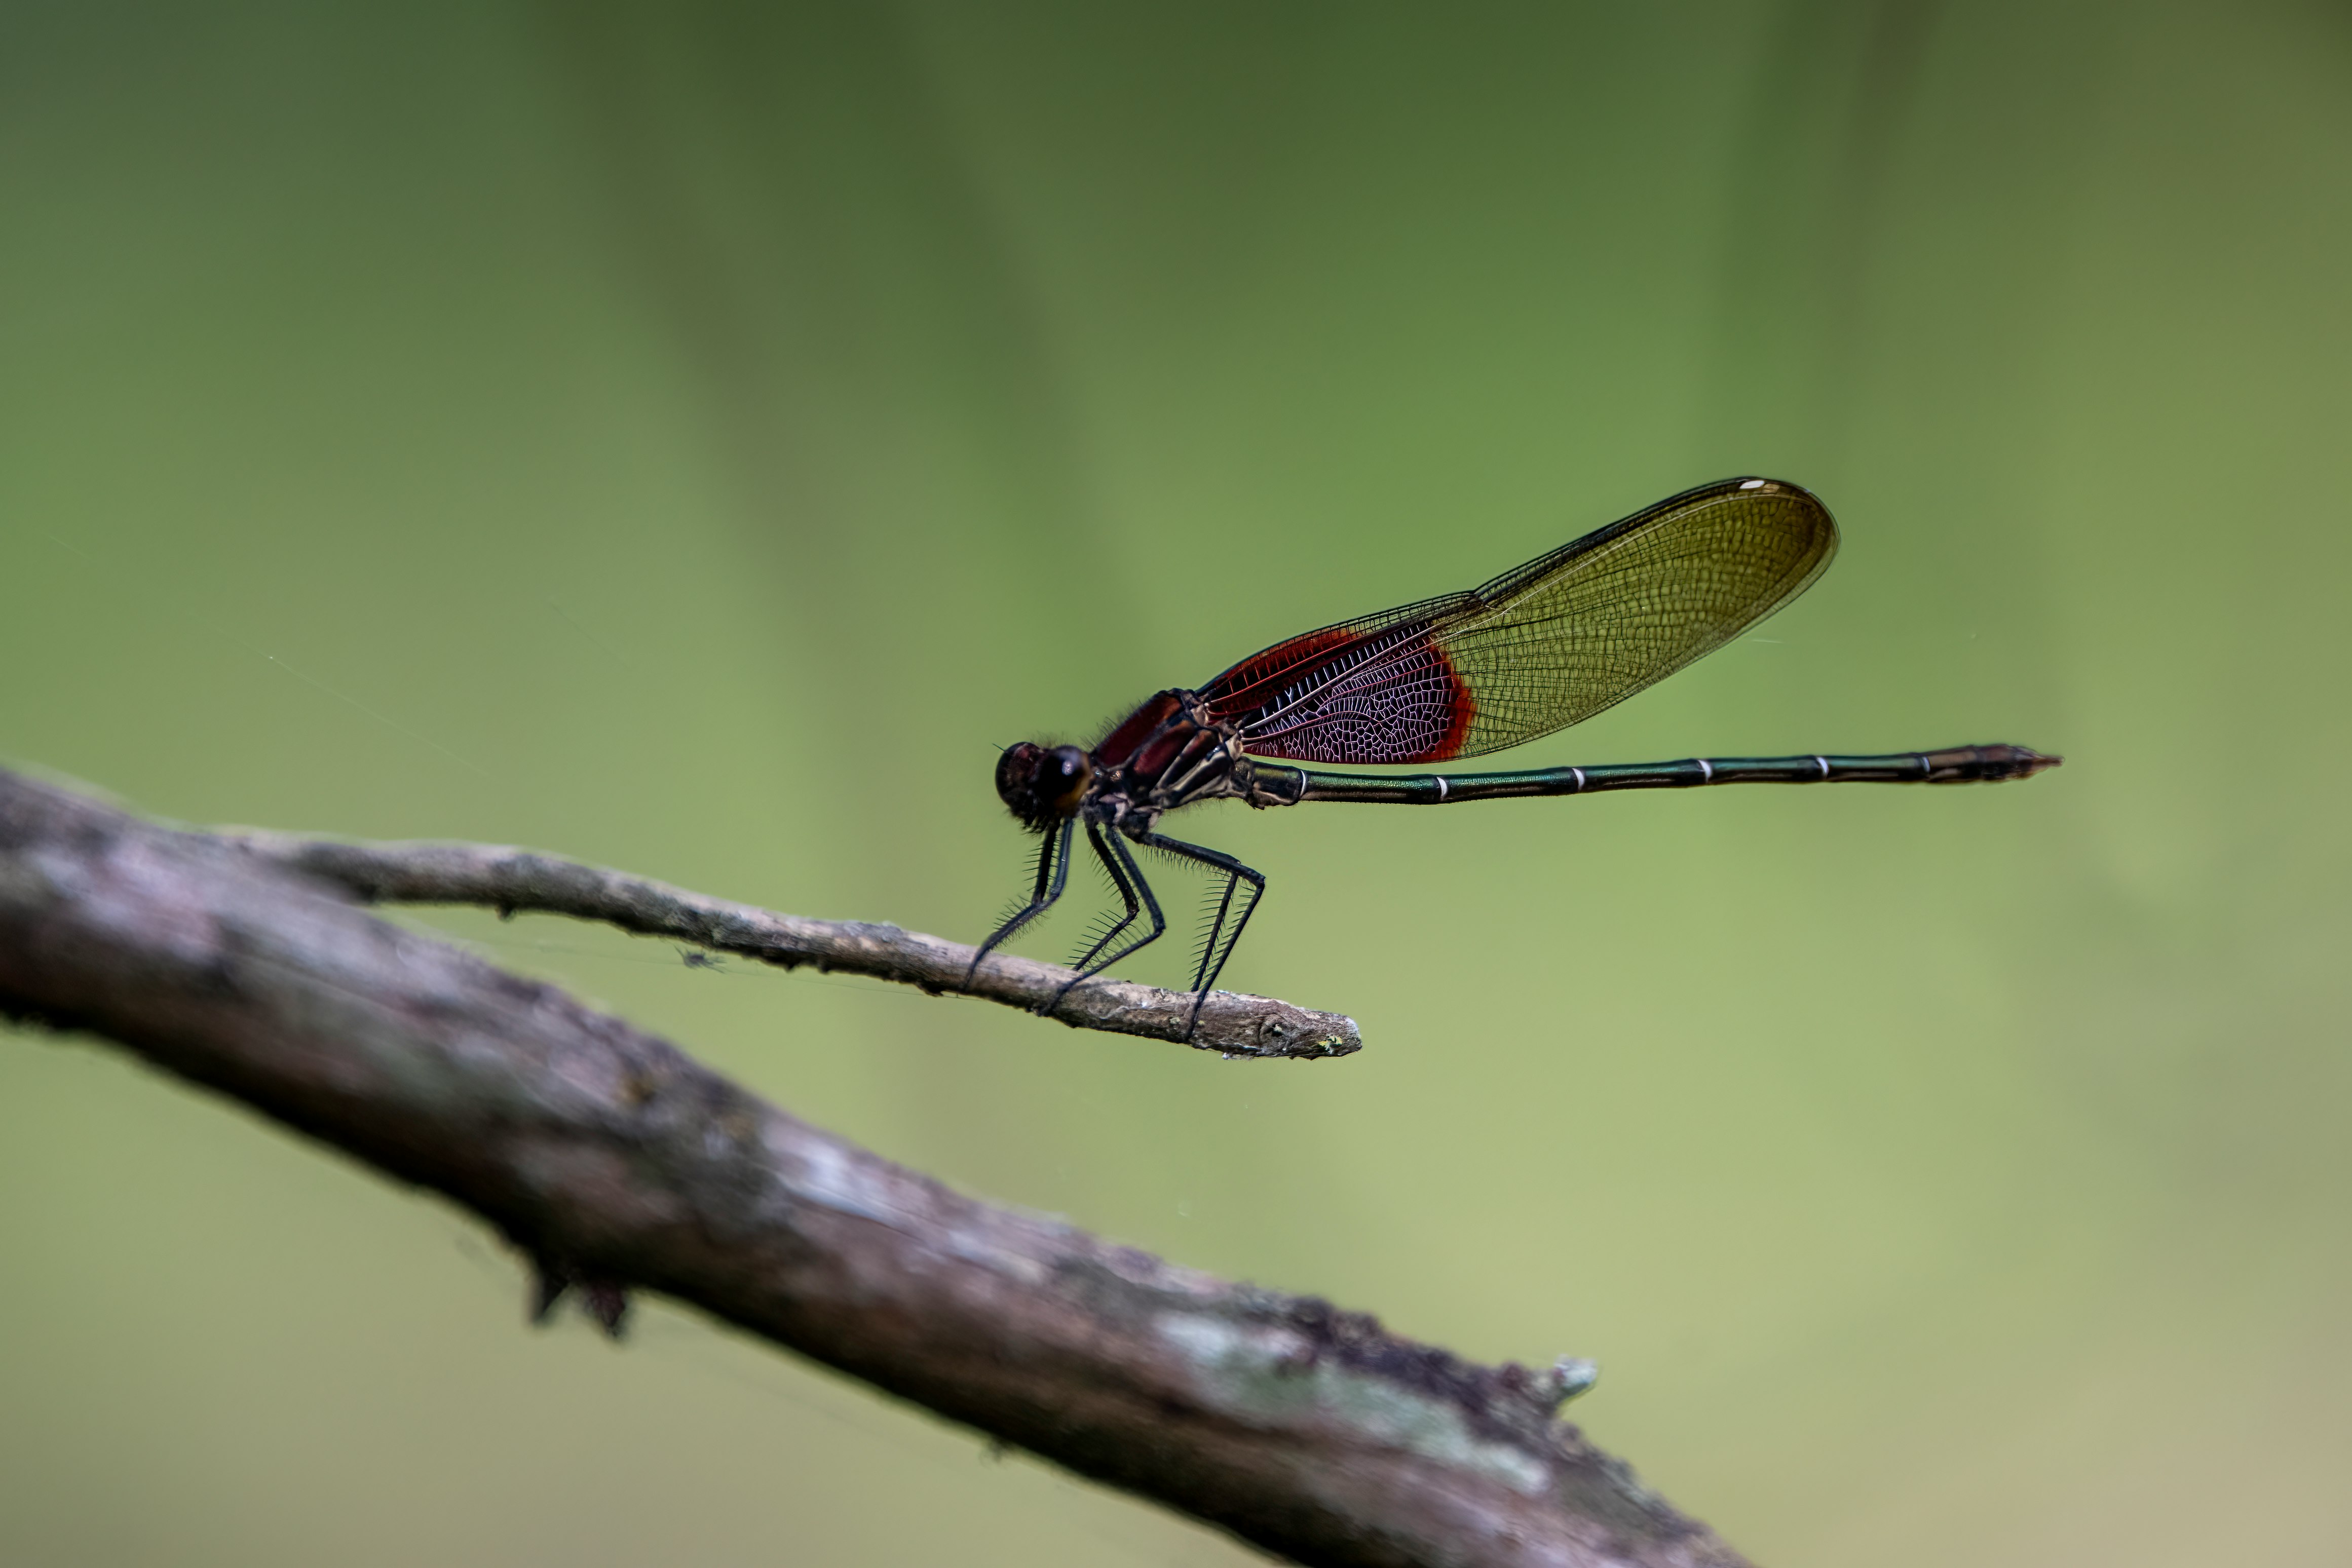 red and black dragonfly perched on brown stem in close up photography during daytime